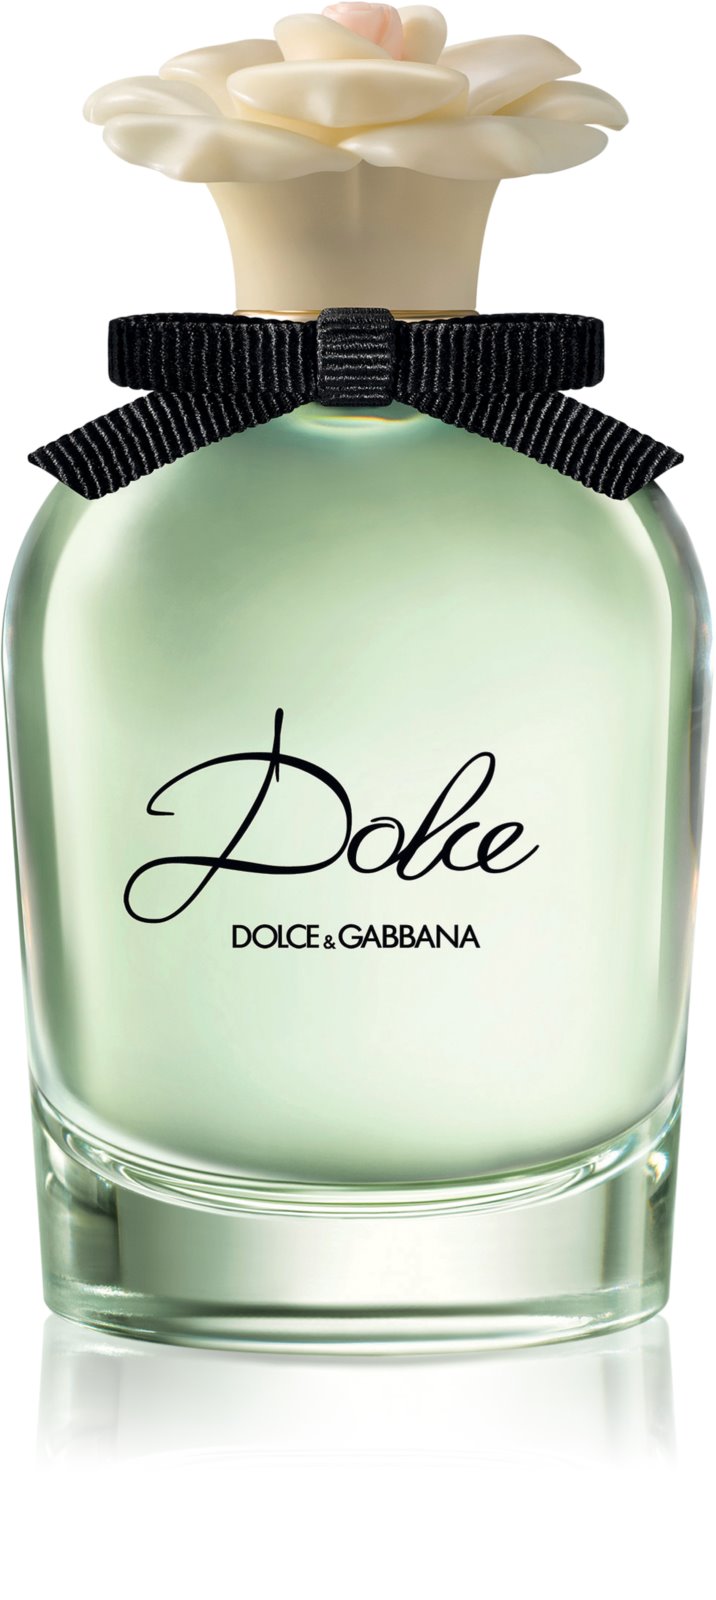 Dolce EDP for Her - Perfume Planet 